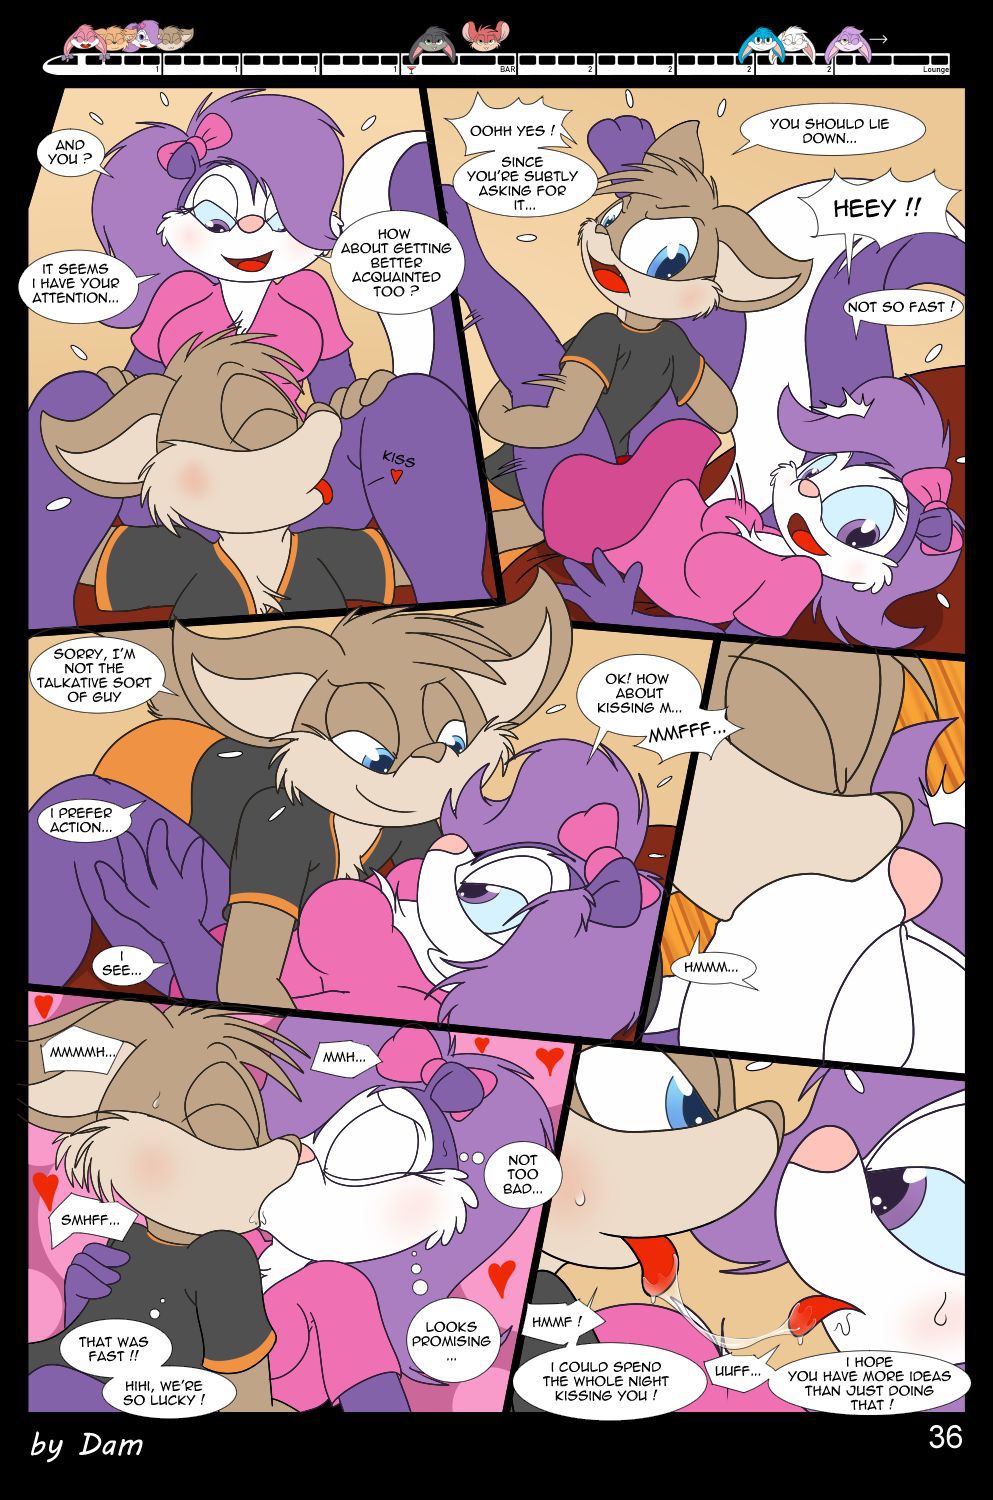 [Dam] Toons on a train [Ongoing] 36